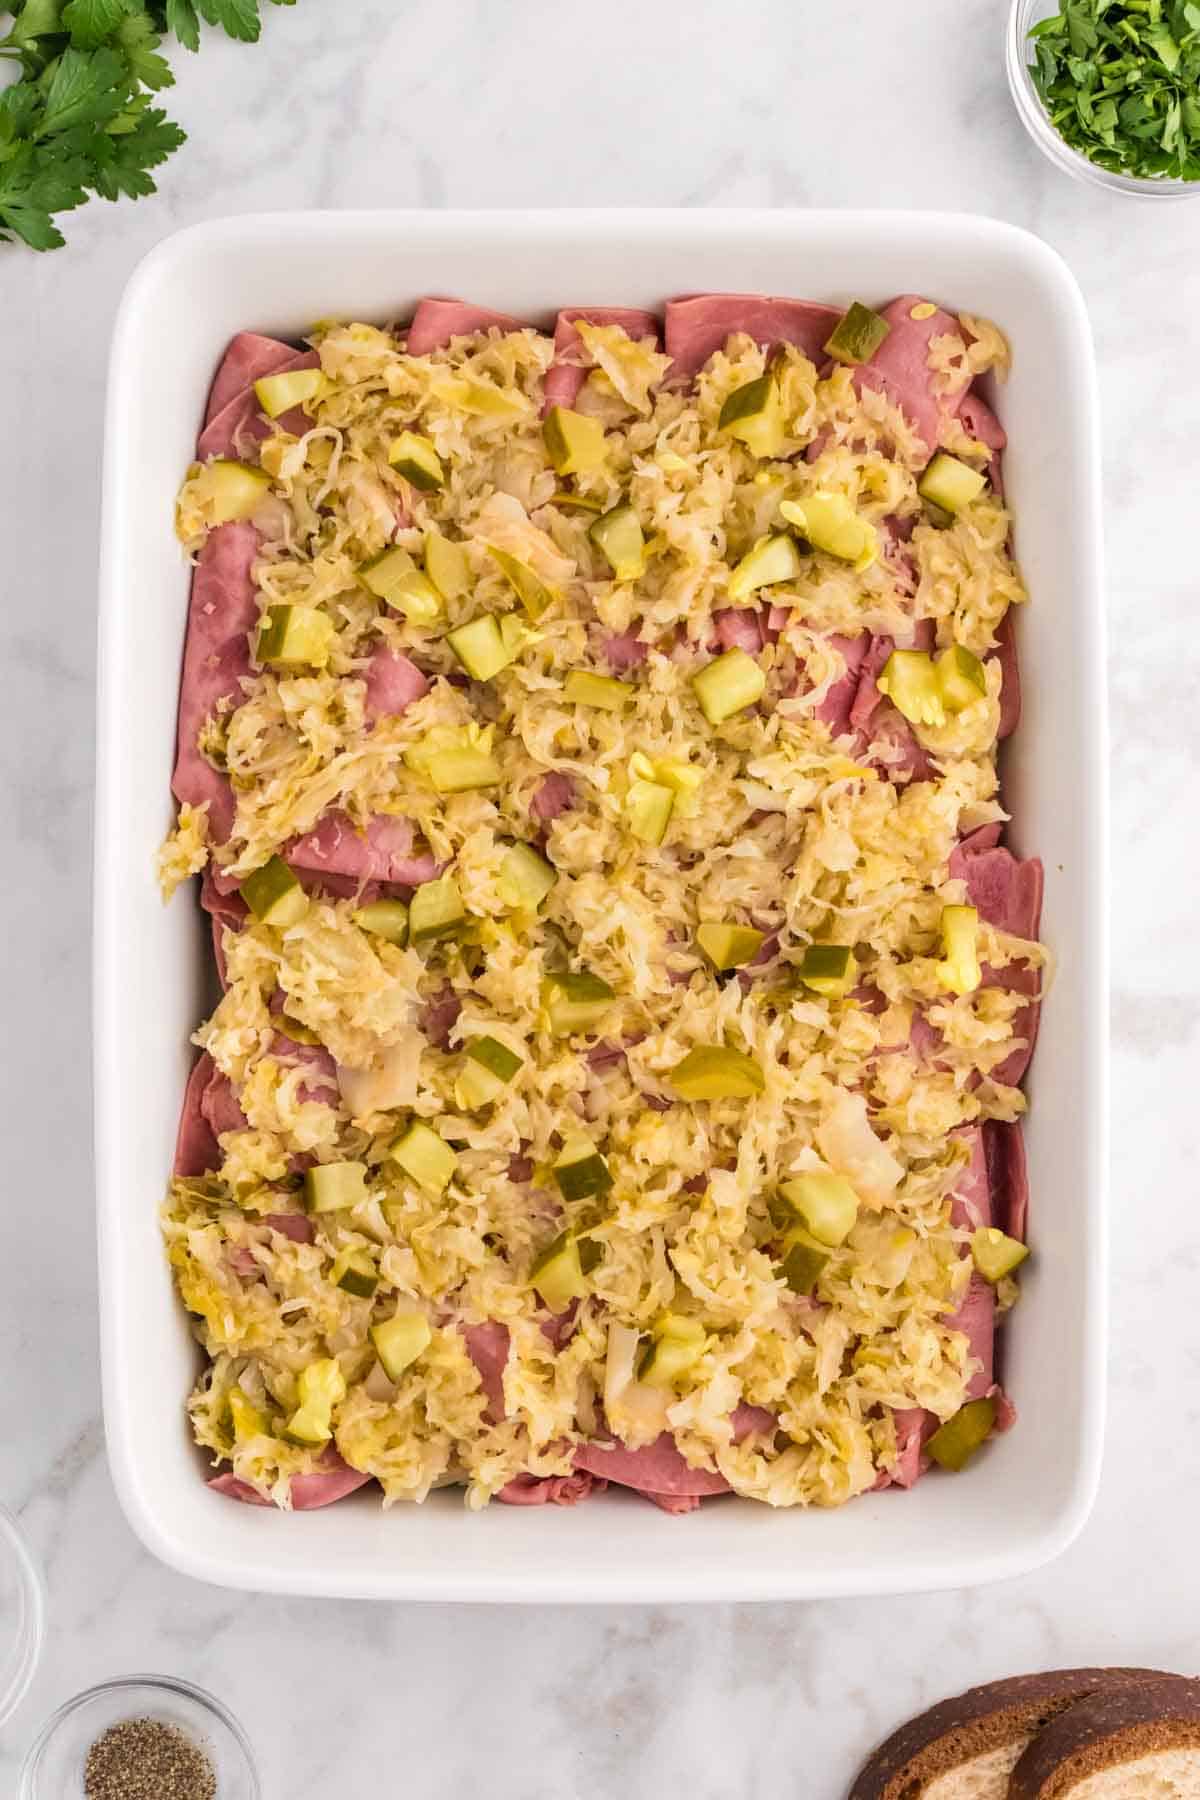 chopped dill pickles and sauerkraut on top of corned beef in a casserole dish